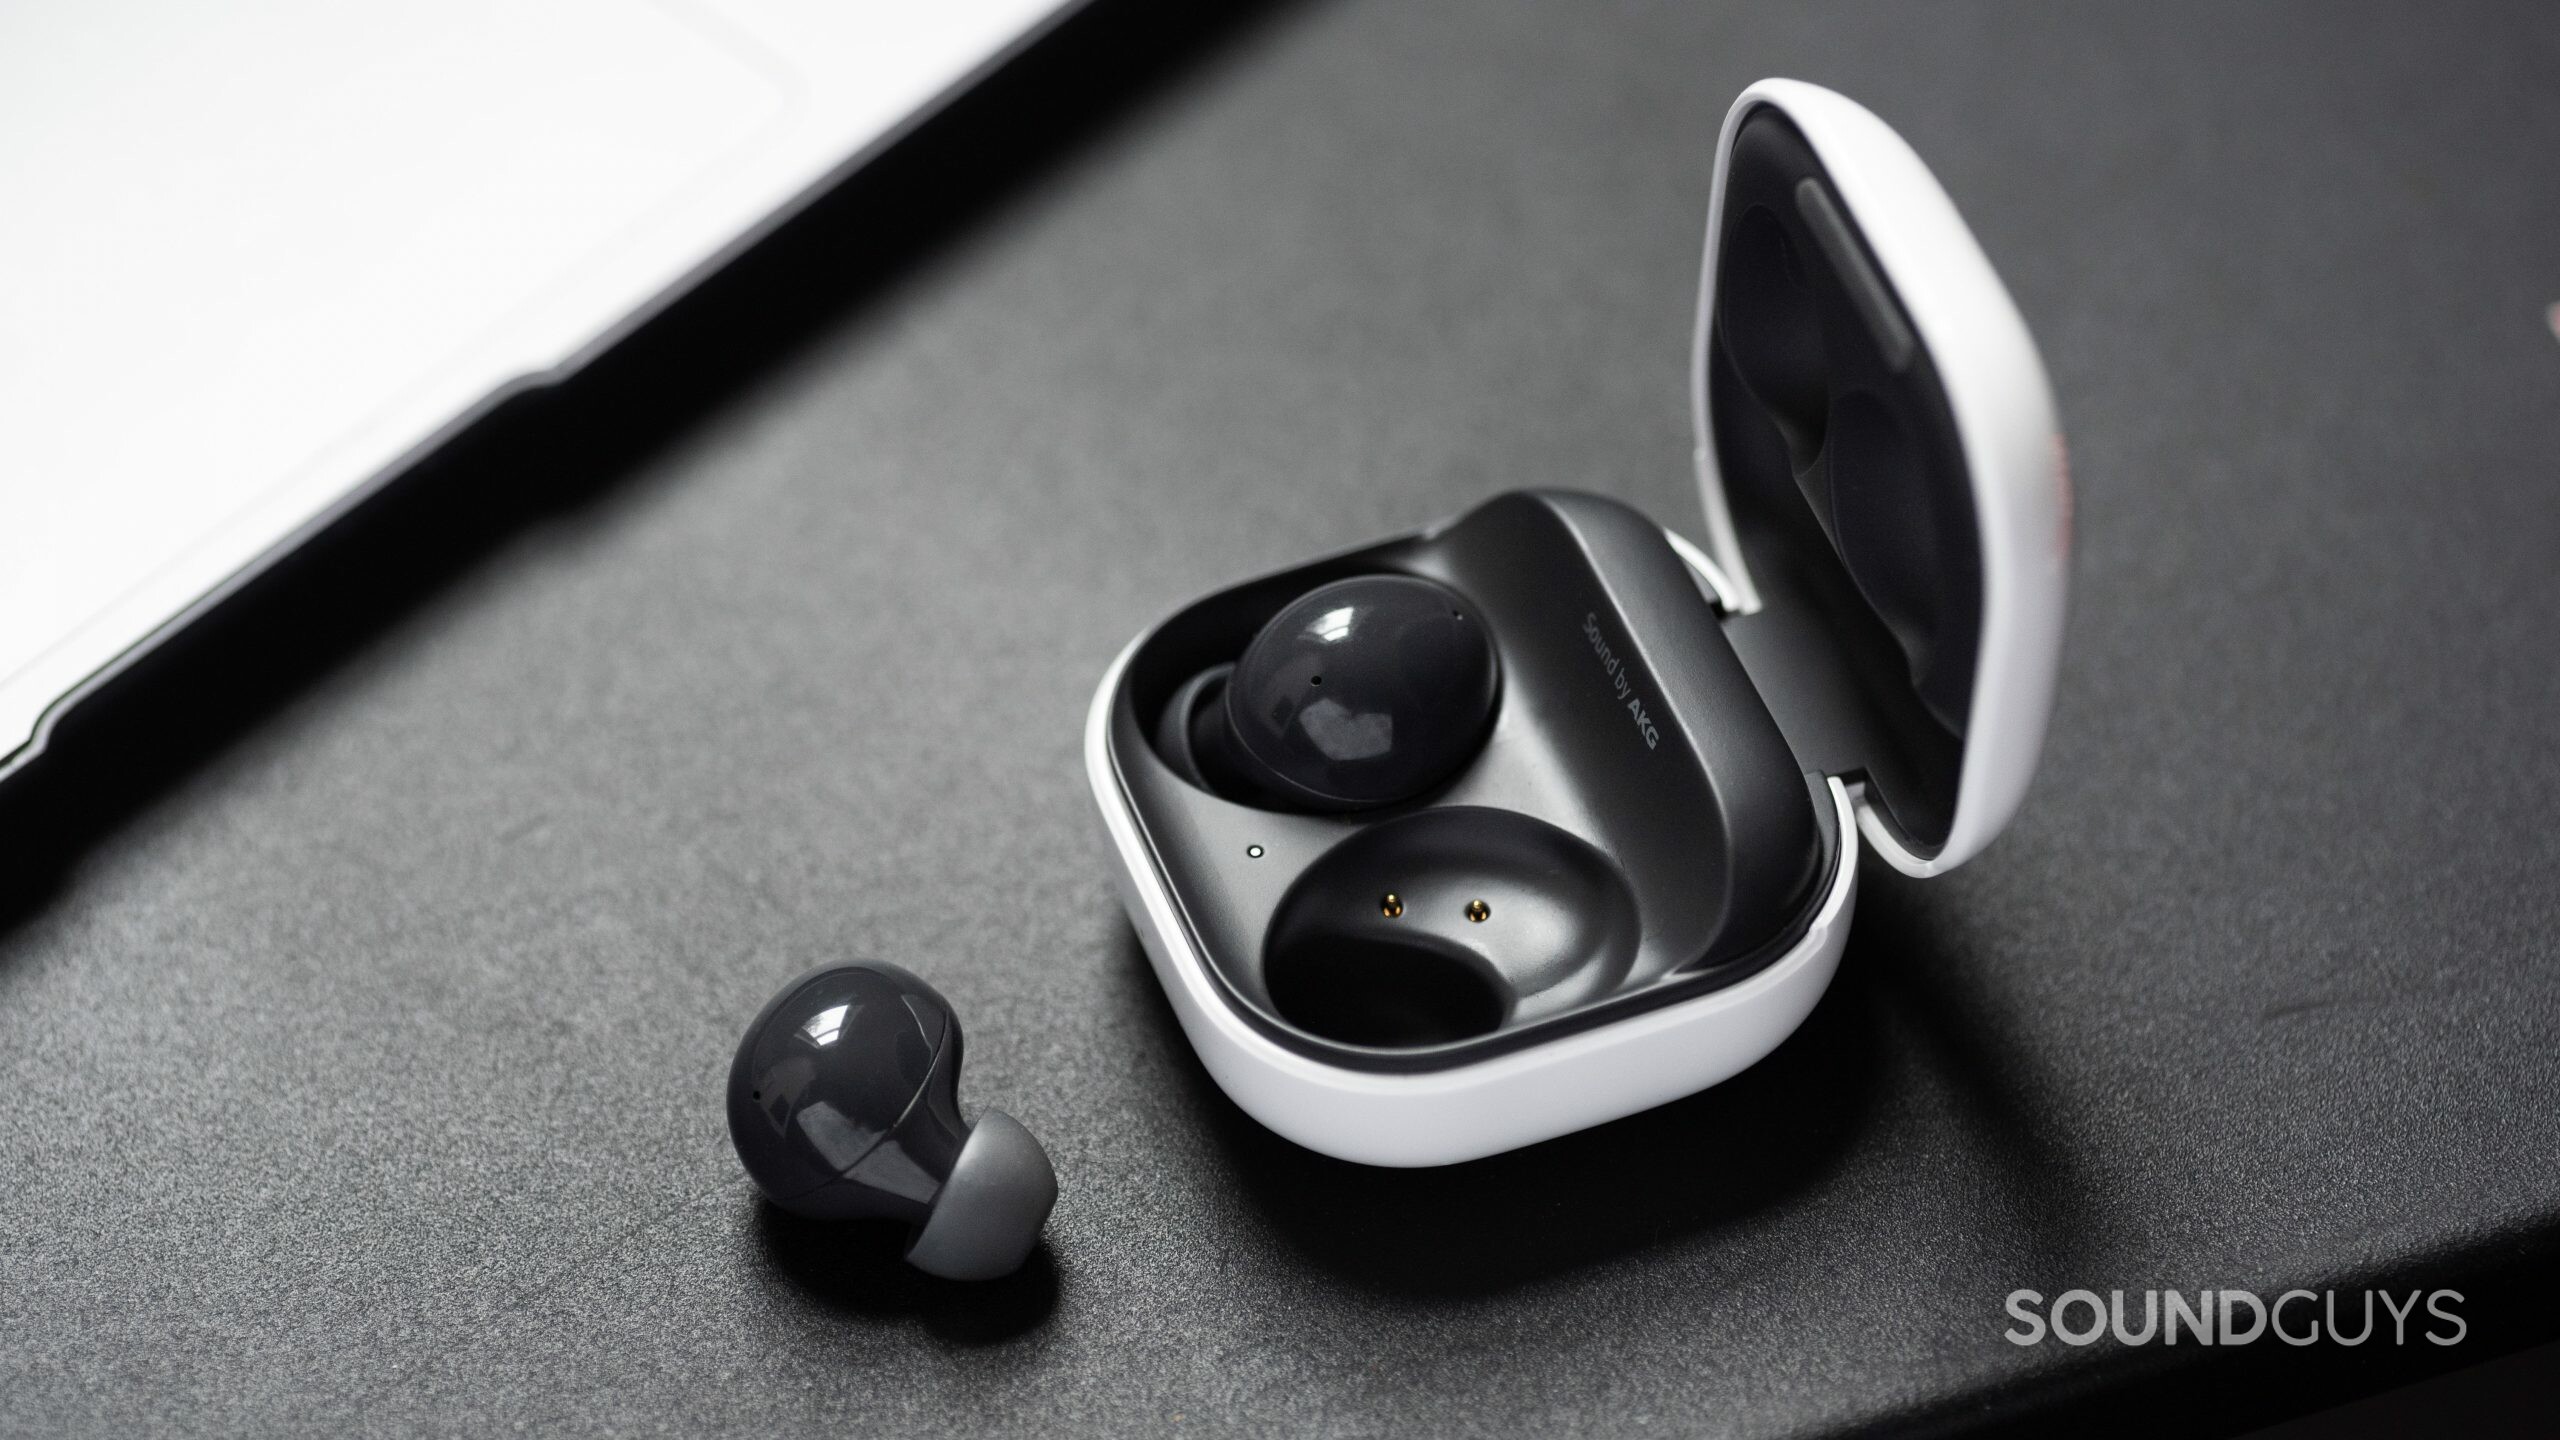 The Samsung Galaxy Buds 2 noise canceling true wireless earbuds with one 'bud out of the open, angled charging case.